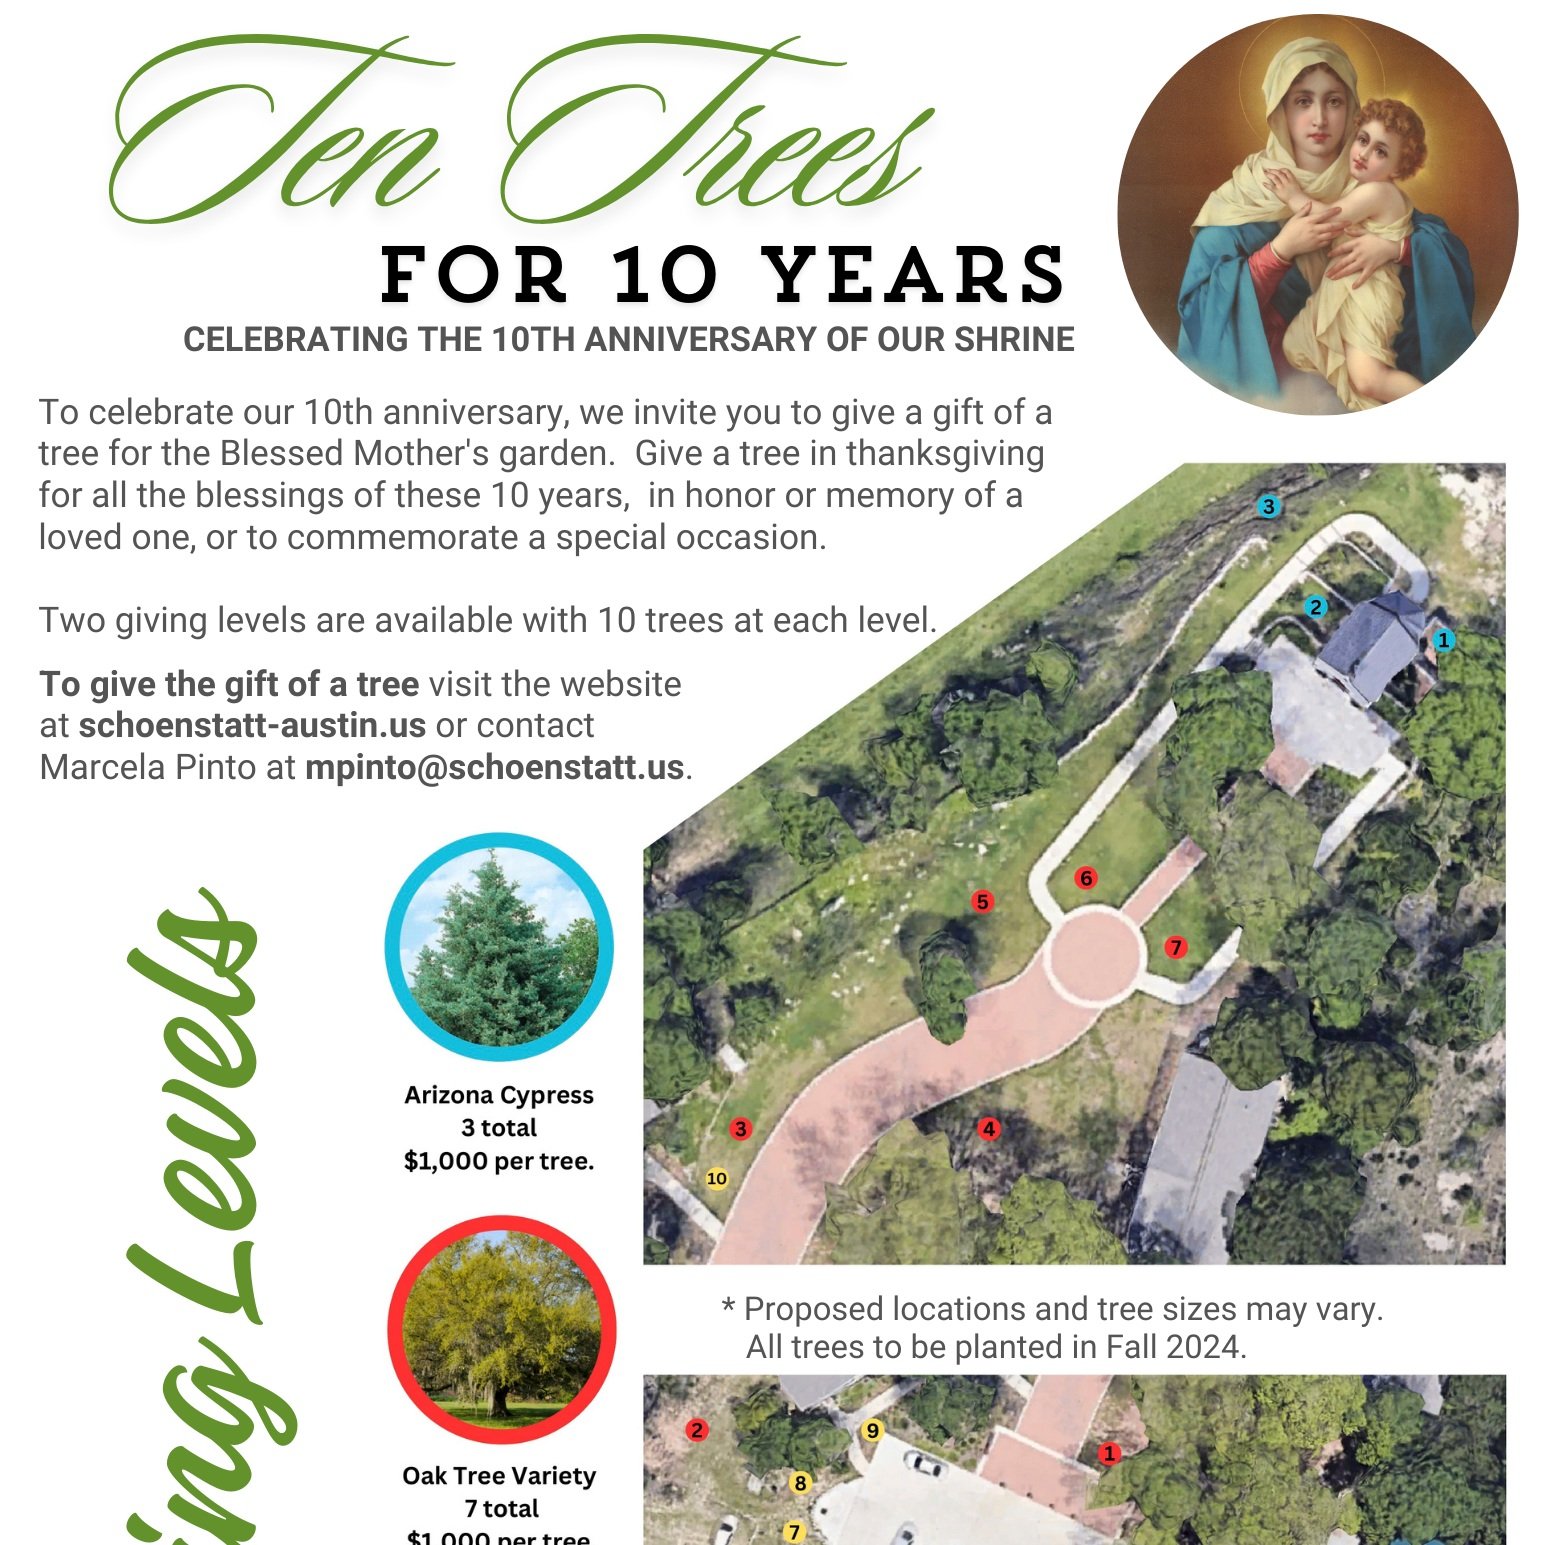 10 Trees for 10 Years